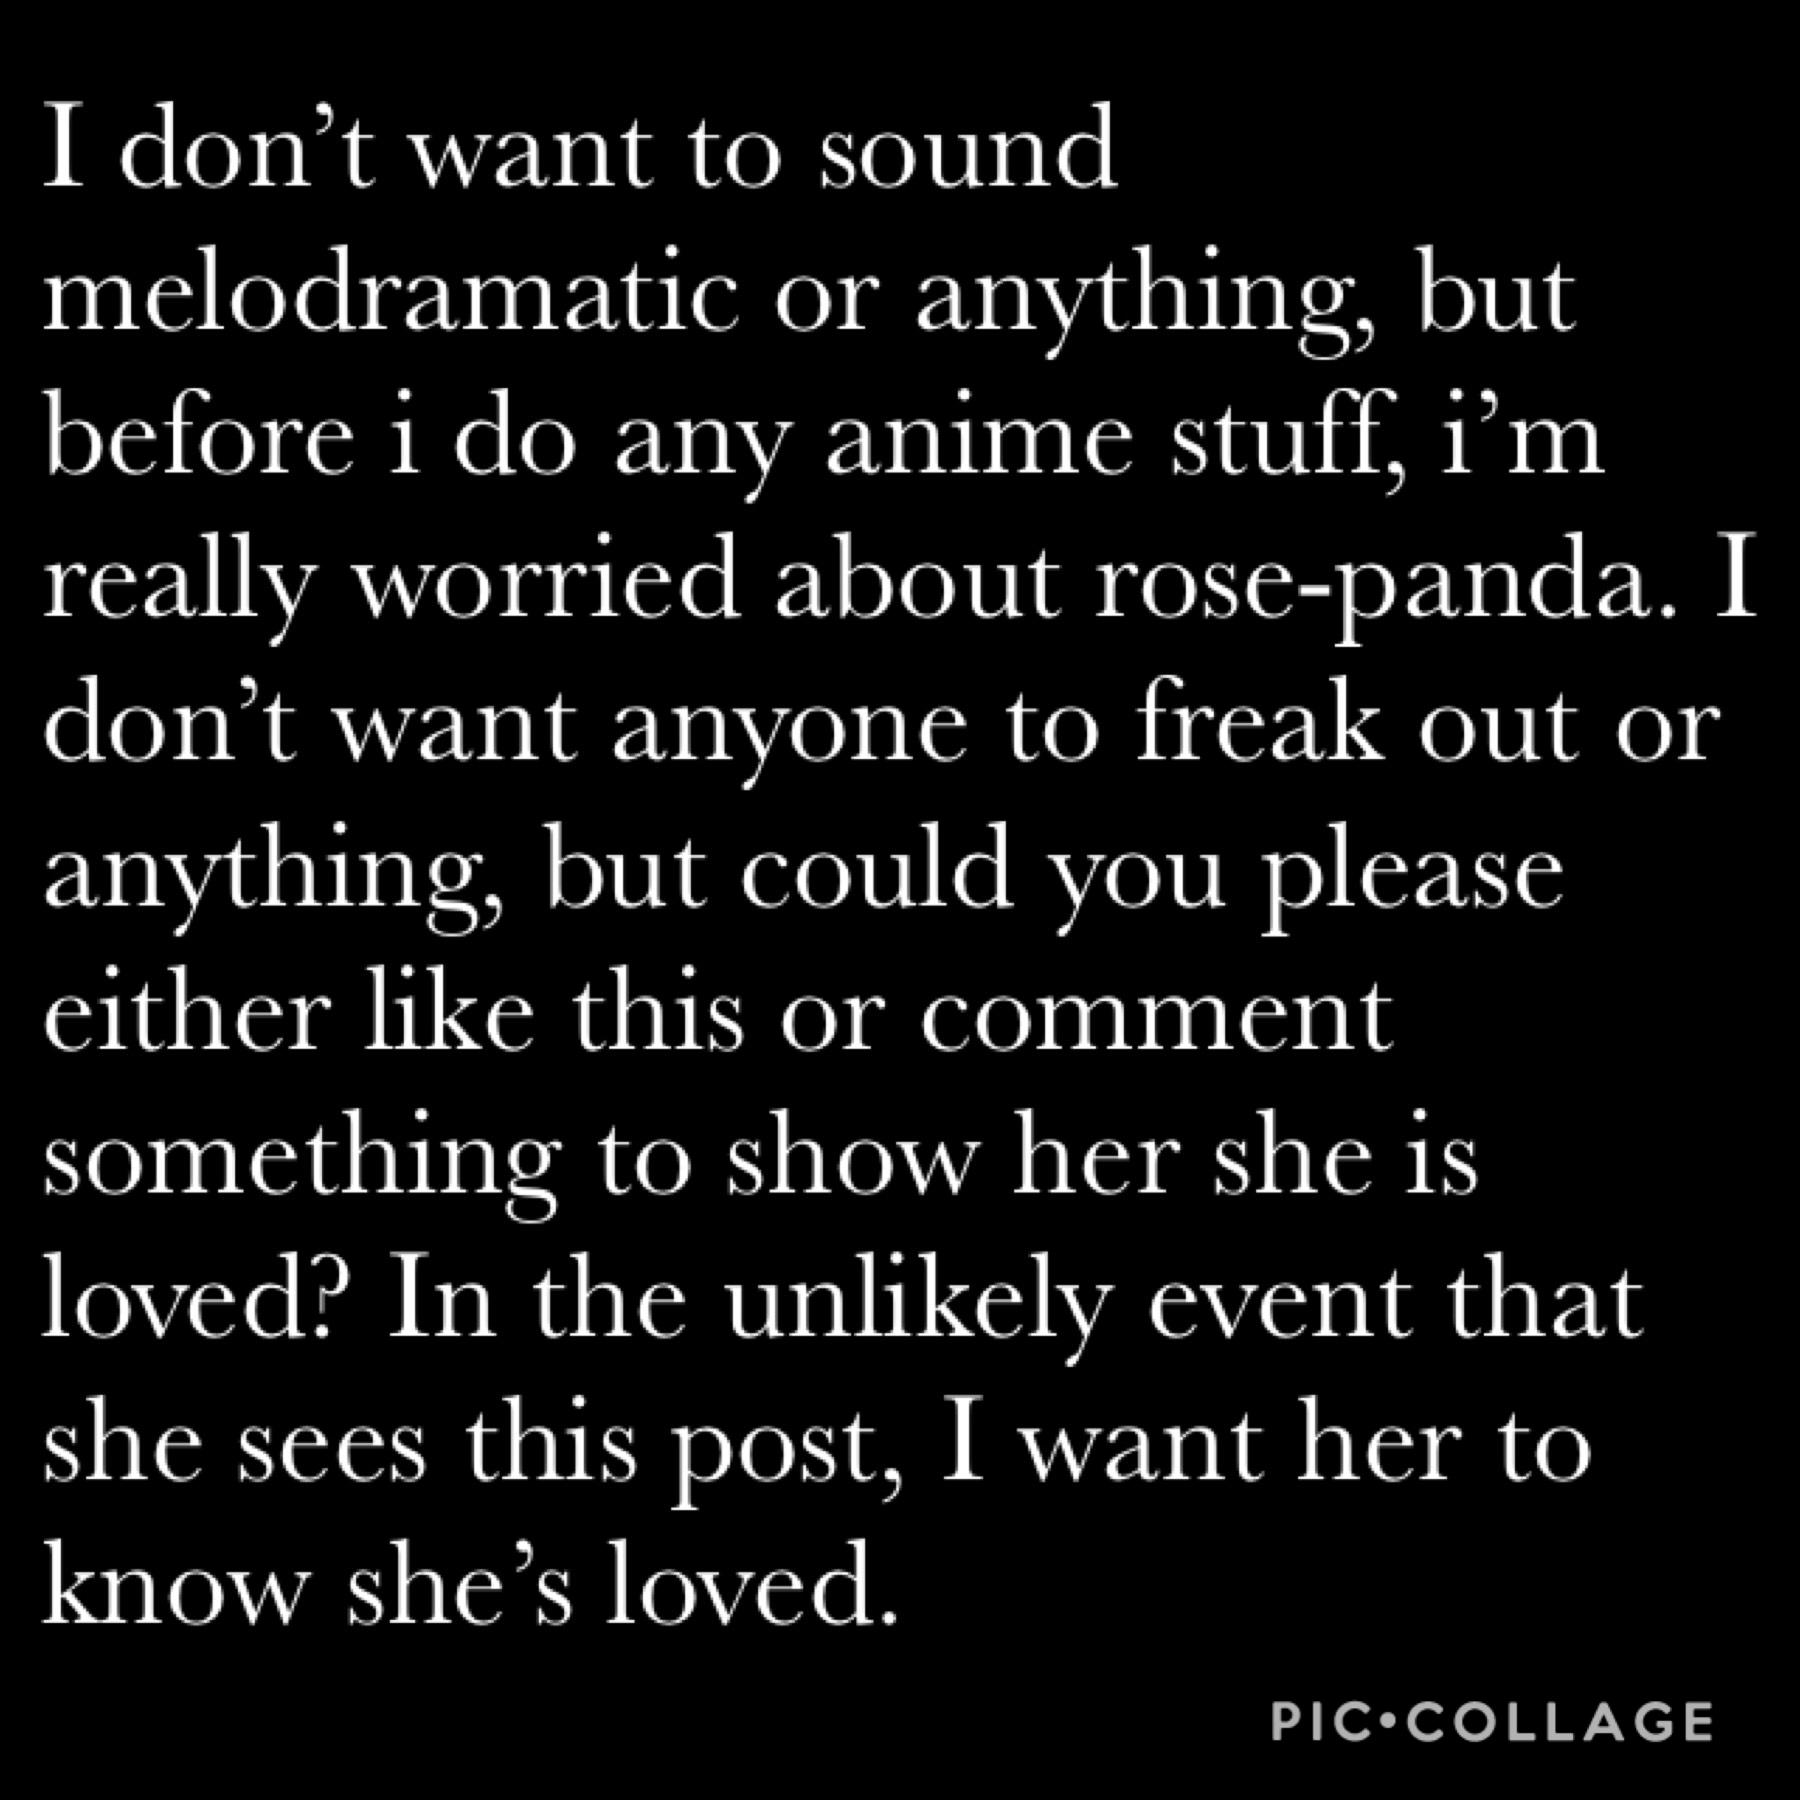 Rose-Panda i swear i care about you a lot you’ve always been so nice to me on PC and if you’re not okay i want you to know that all your rosepedals love you 